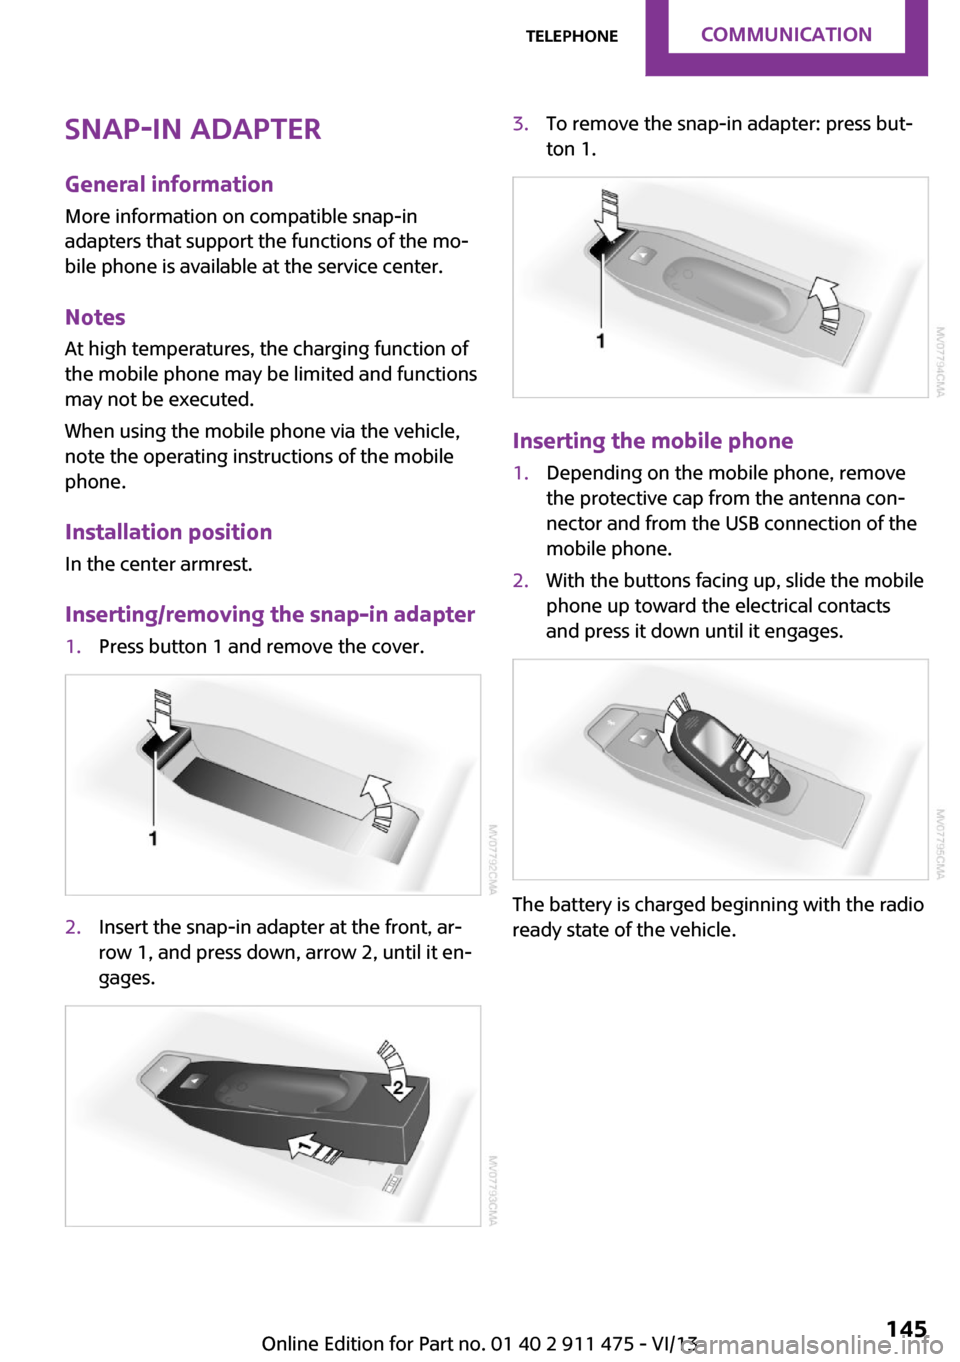 MINI Roadster 2014  Owners Manual Snap-in adapter
General information More information on compatible snap-in
adapters that support the functions of the mo‐
bile phone is available at the service center.
Notes At high temperatures, t